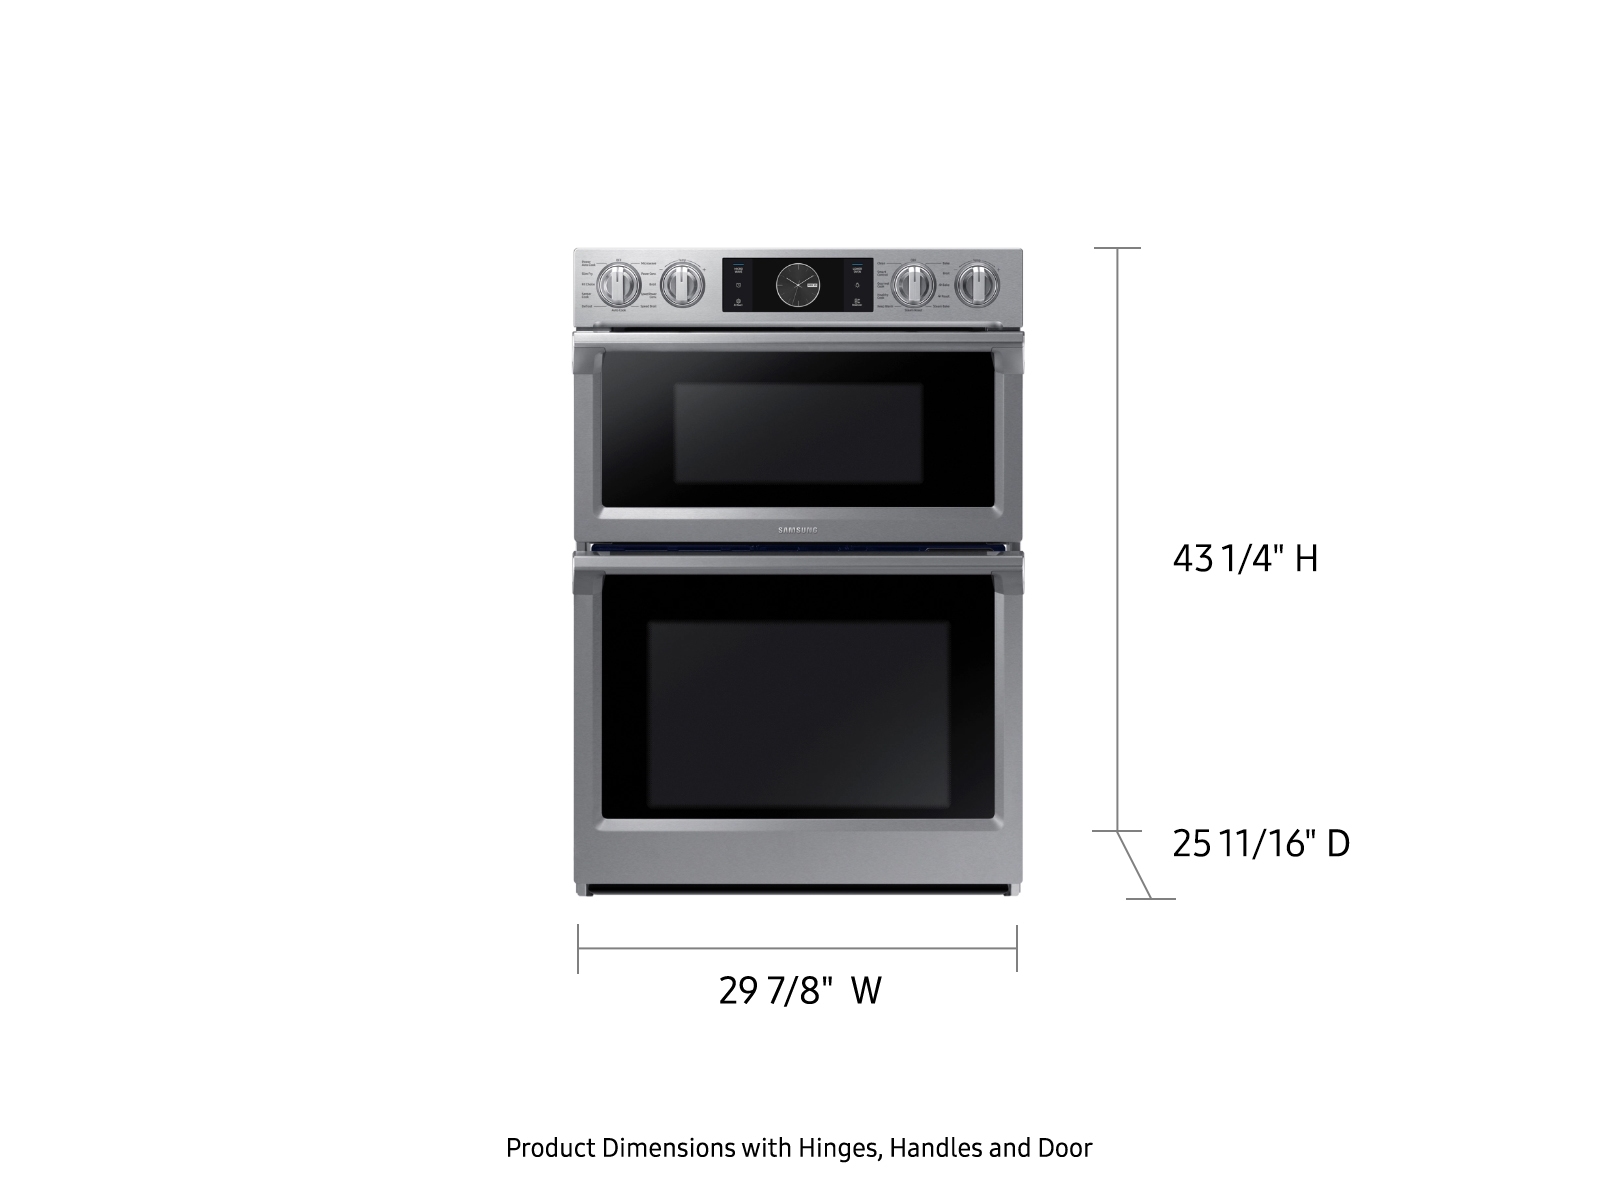 Samsung - 30 Microwave Combination Wall Oven with Flex Duo - Stainless Steel